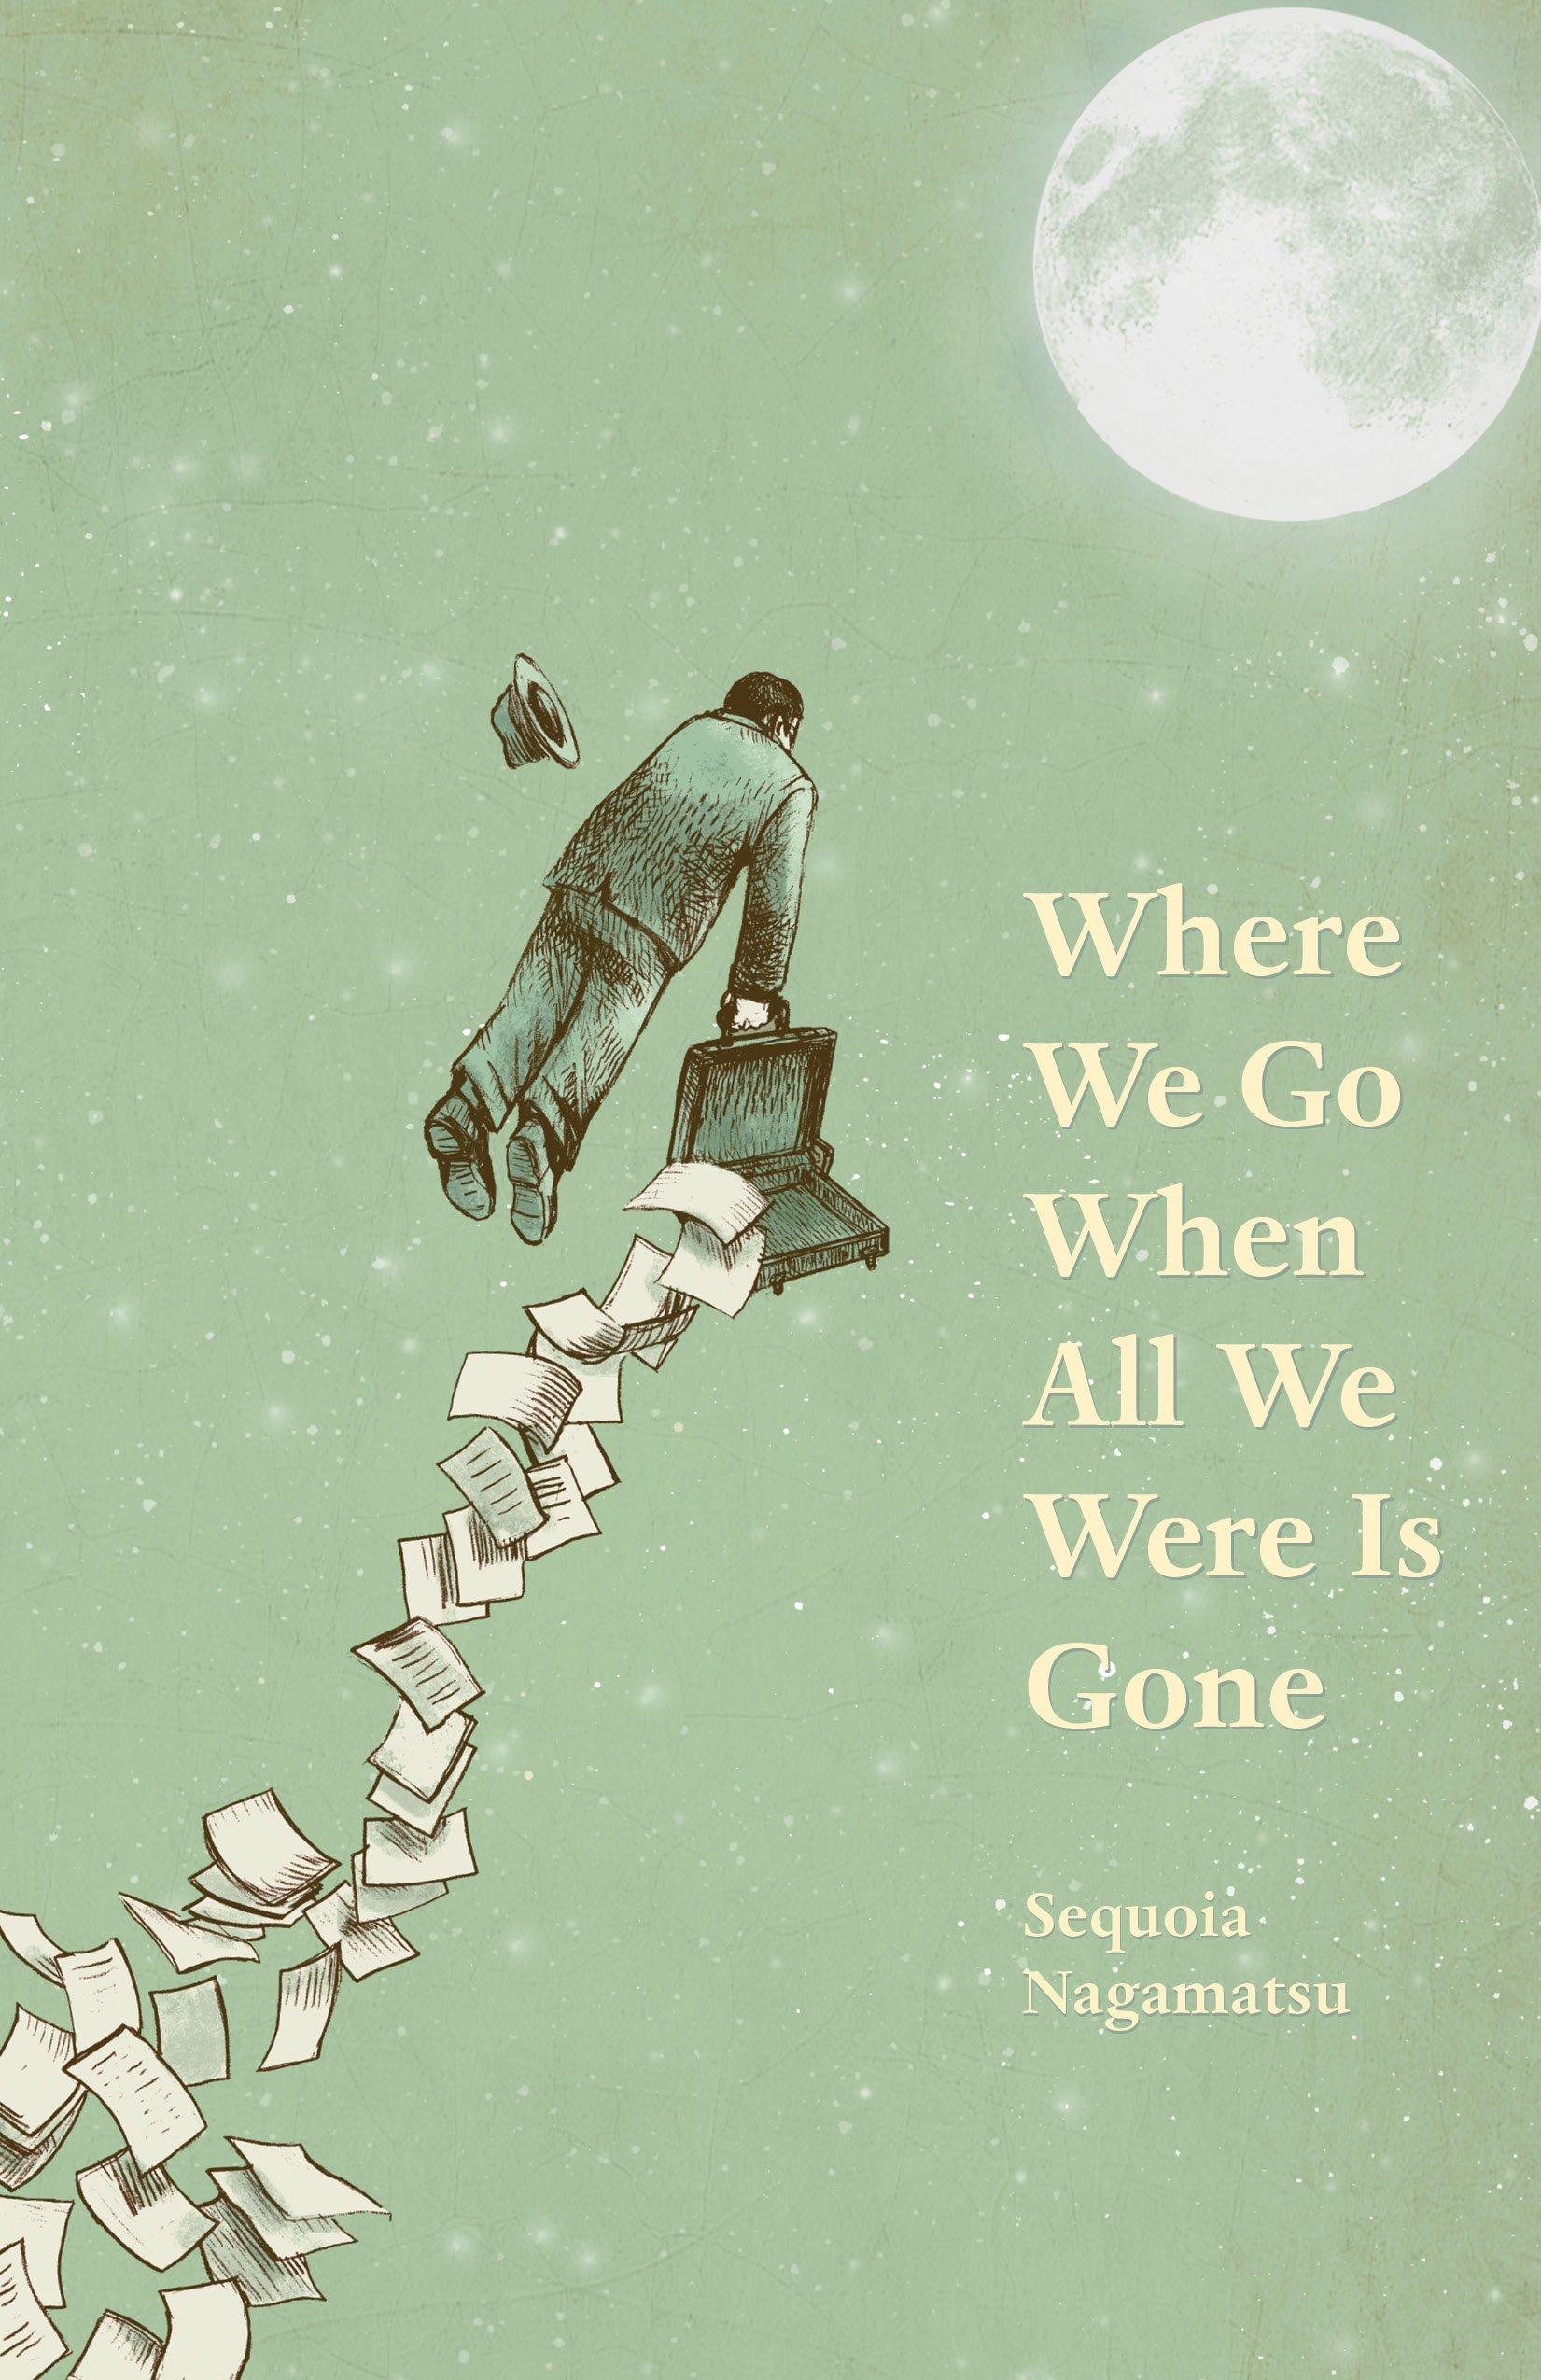 Strange Horizons - Where We Go When All We Were Is Gone by Sequoia Nagamatsu By Stephanie Chan